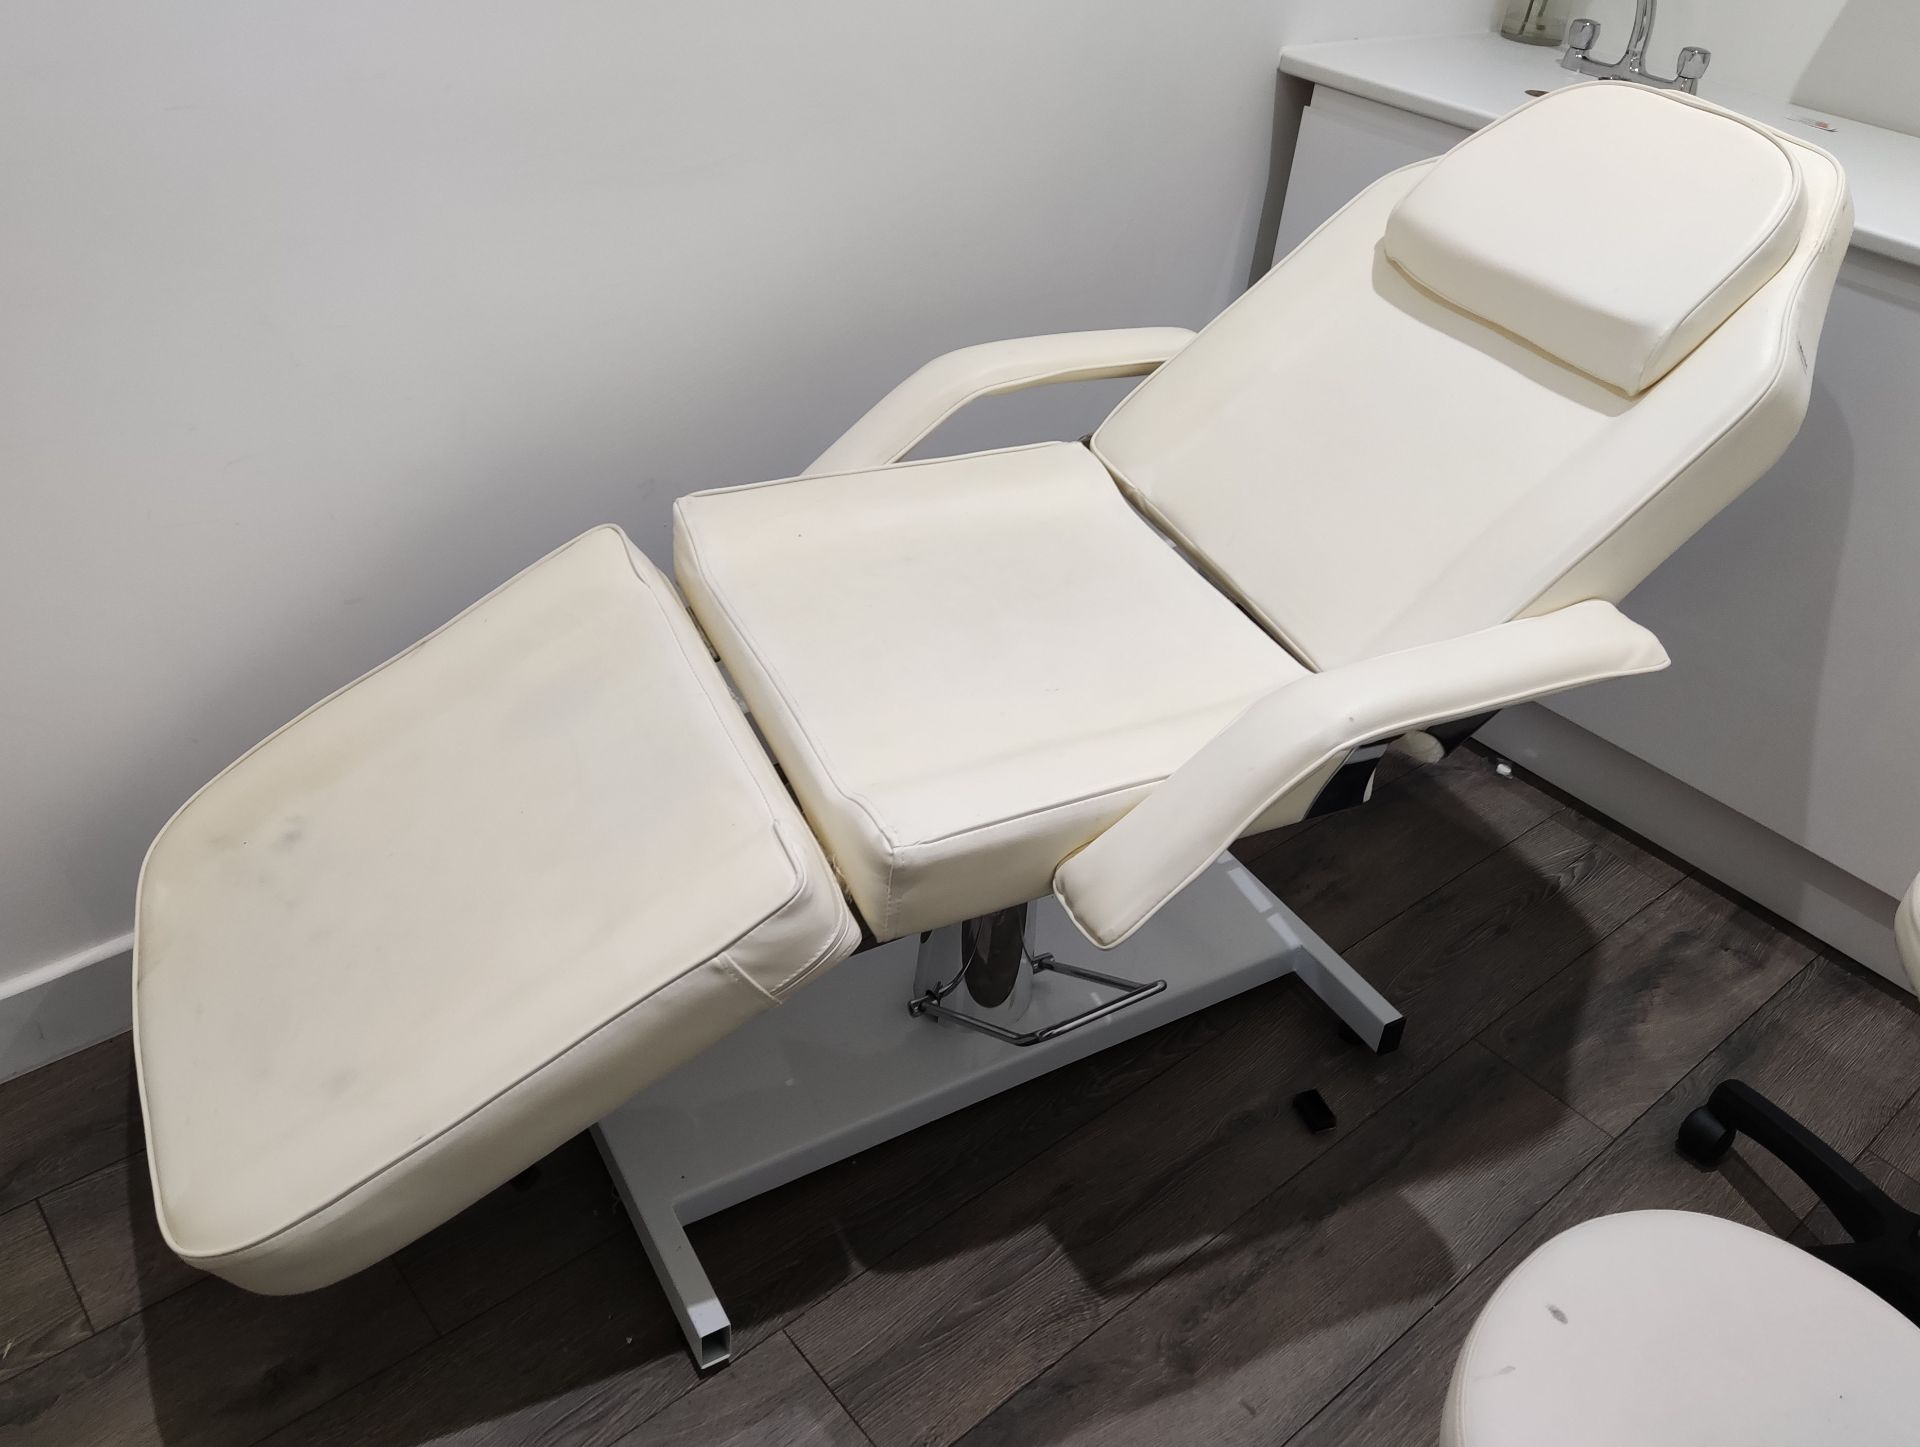 1 x Hydraulic Reclining Treatment Chair - LBC104 - CL763- Location: Sale M33Dimensions: 183 - Image 3 of 6